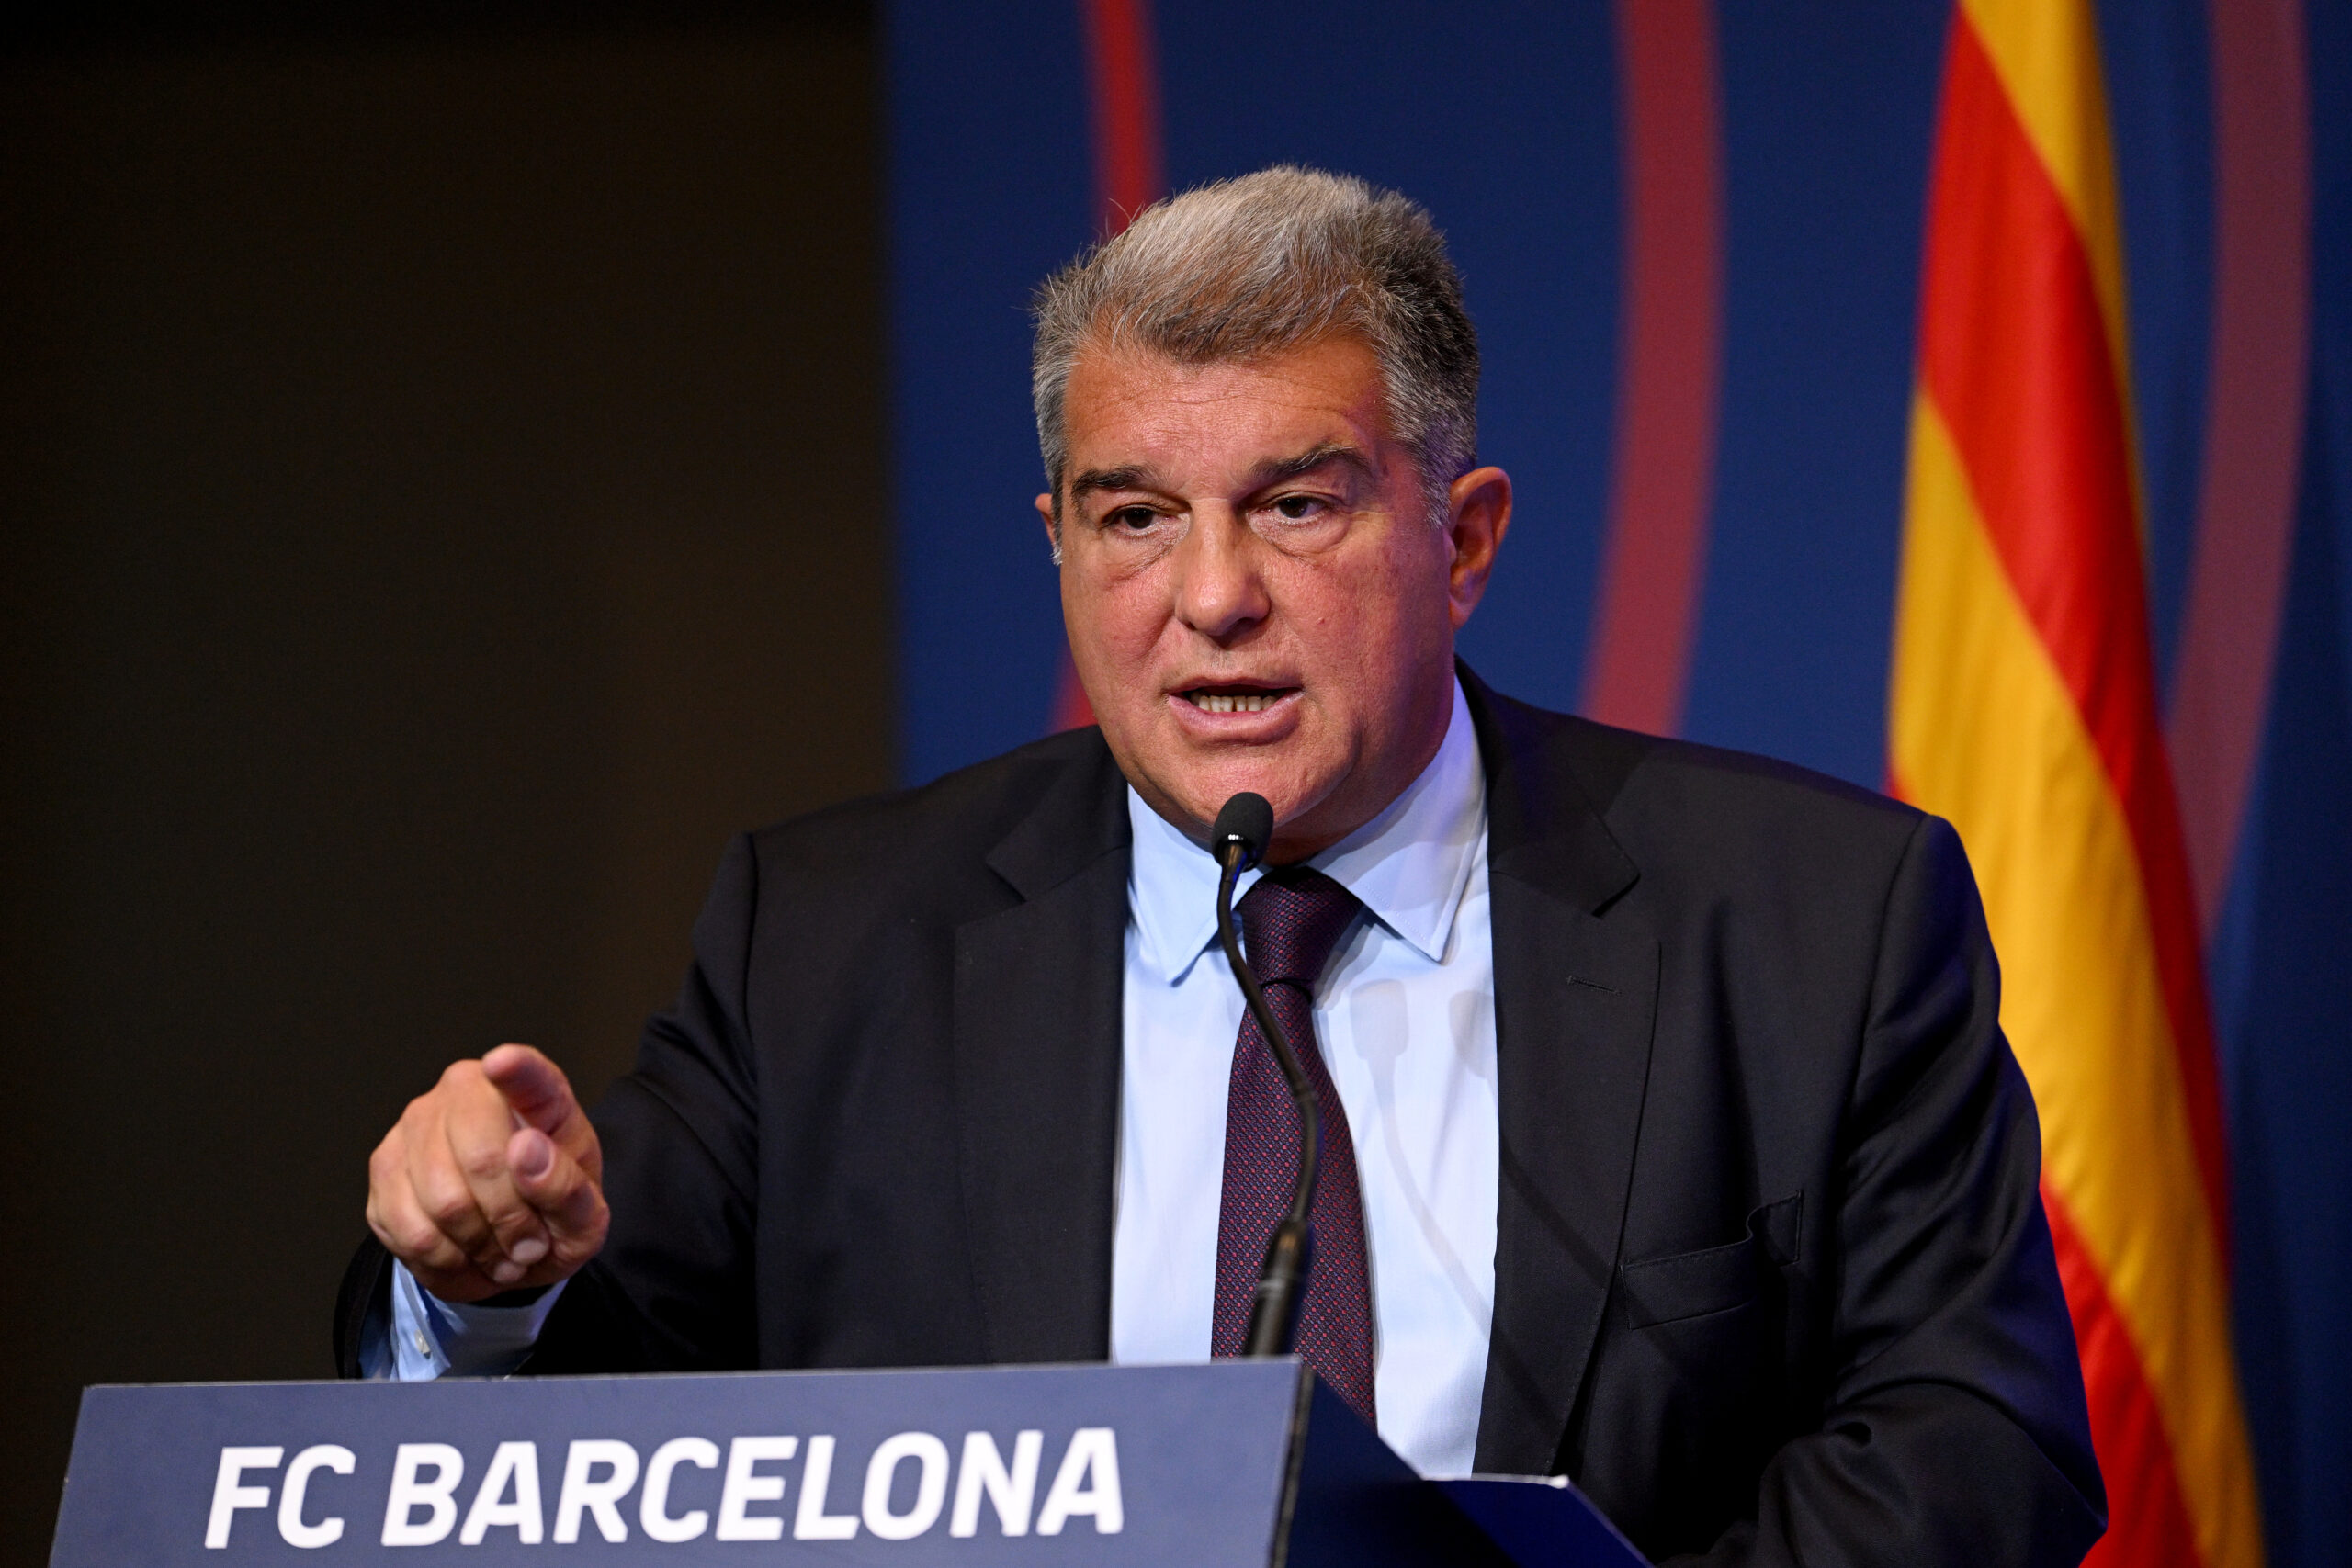 BARCELONA, SPAIN - APRIL 17: FC Barcelona President Joan Laporta gives a press conference in response to recent allegations over payments made to referees by the club, at Spotify Camp Nou on April 17, 2023 in Barcelona, Spain. UEFA and Spanish authorities are investigating Barcelona over the payment of millions of euros to the company of Jose Maria Enriquez Negreira, the former vice-president of Spanish football's refereeing committee. If found guilty, UEFA's investigation could lead to a Champions League ban for the club.